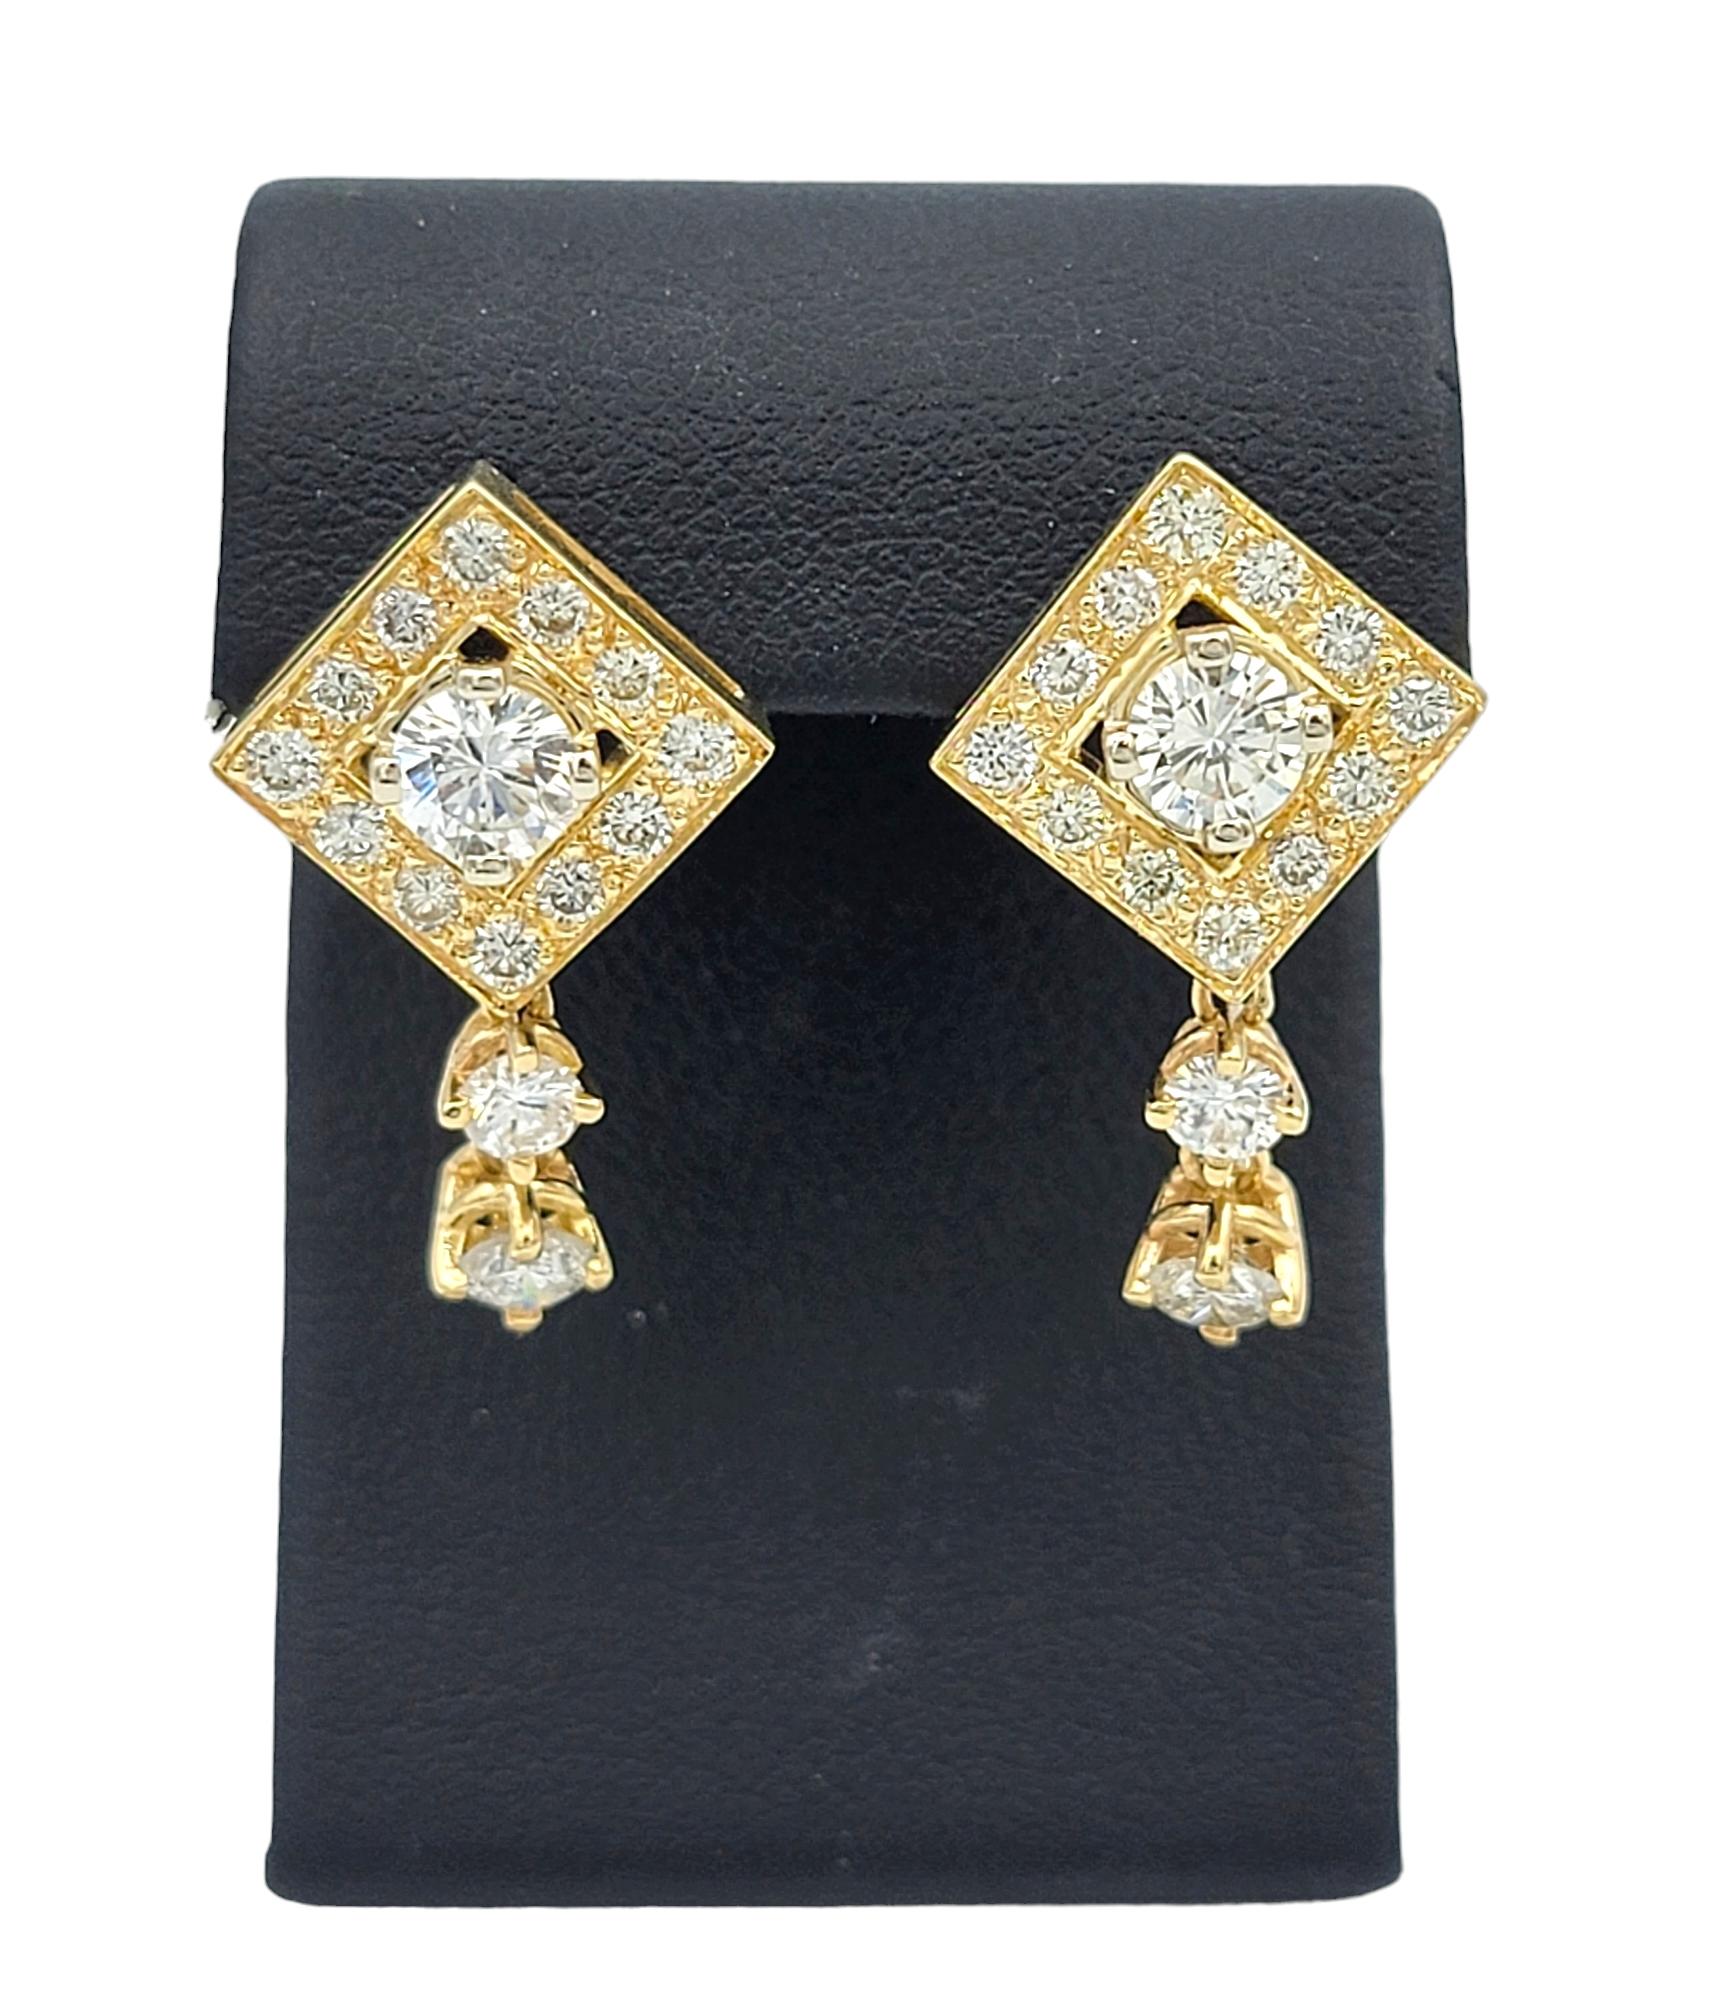 Squared 2.00 Carat Total Round Diamond Dangle Earrings in 14 Karat Yellow Gold  In Good Condition For Sale In Scottsdale, AZ